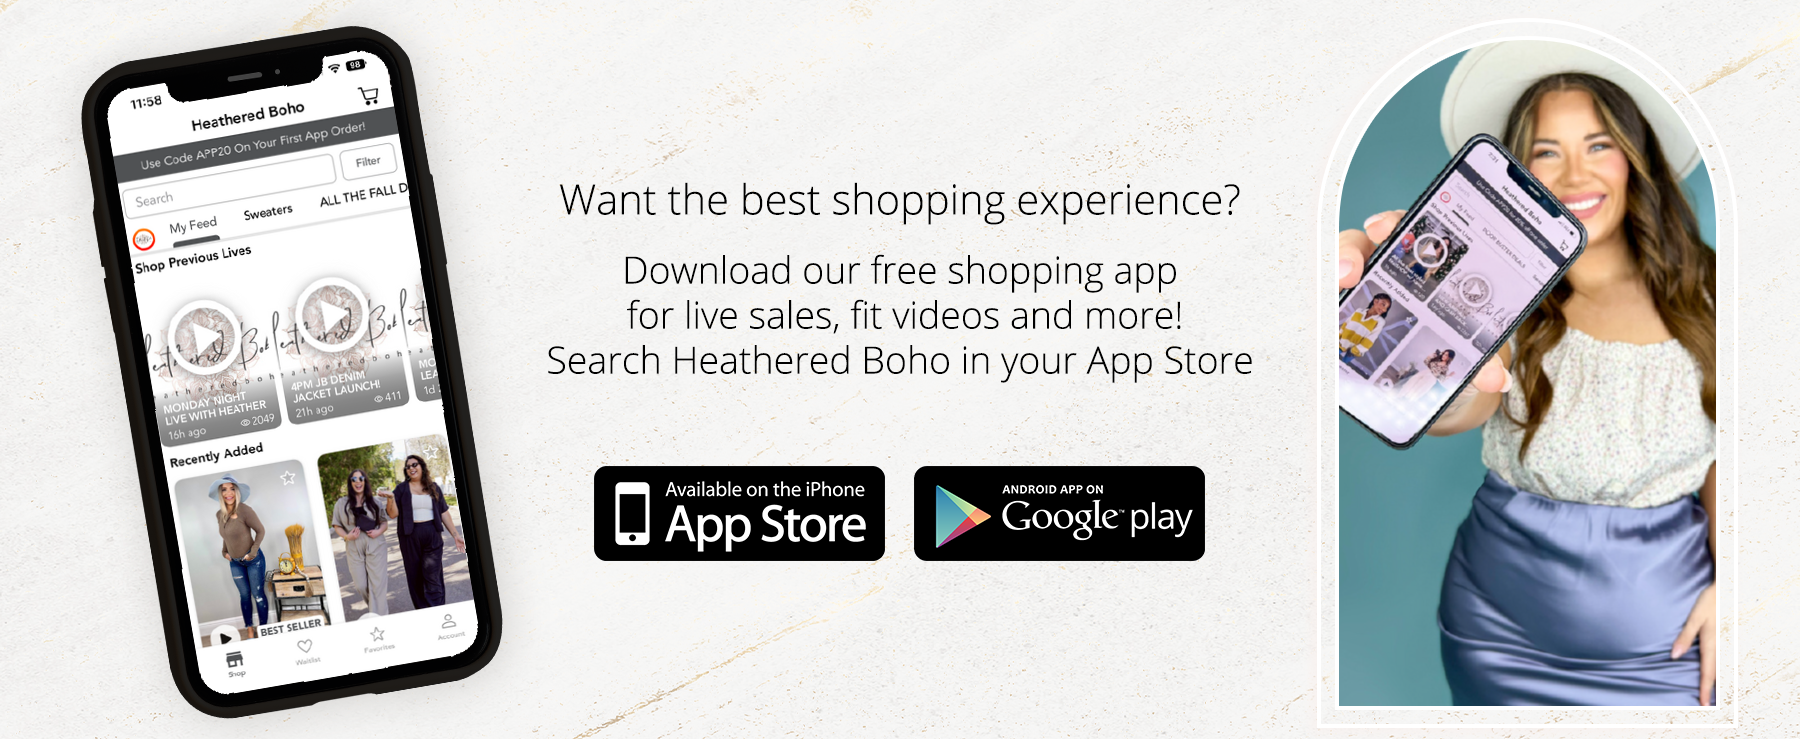 Want the best shopping expirience? Download our free shopping app for live sales, fit videos and more! Search Heathered Boho in your App Store!